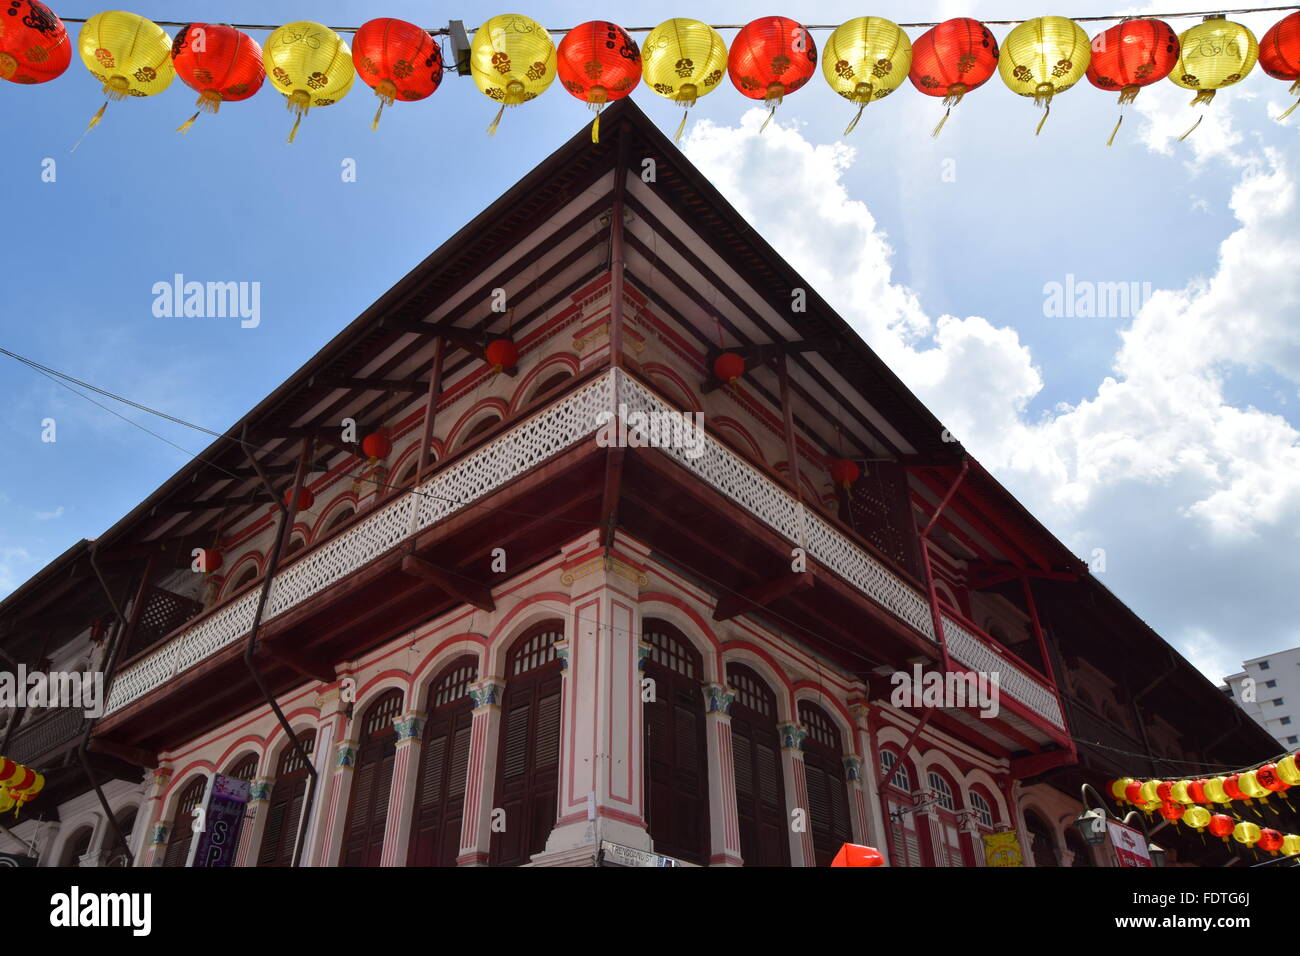 Shop house in Chinatown, Singapore during Chinese New Year with a string of red and yellow Chinese lanterns Stock Photo